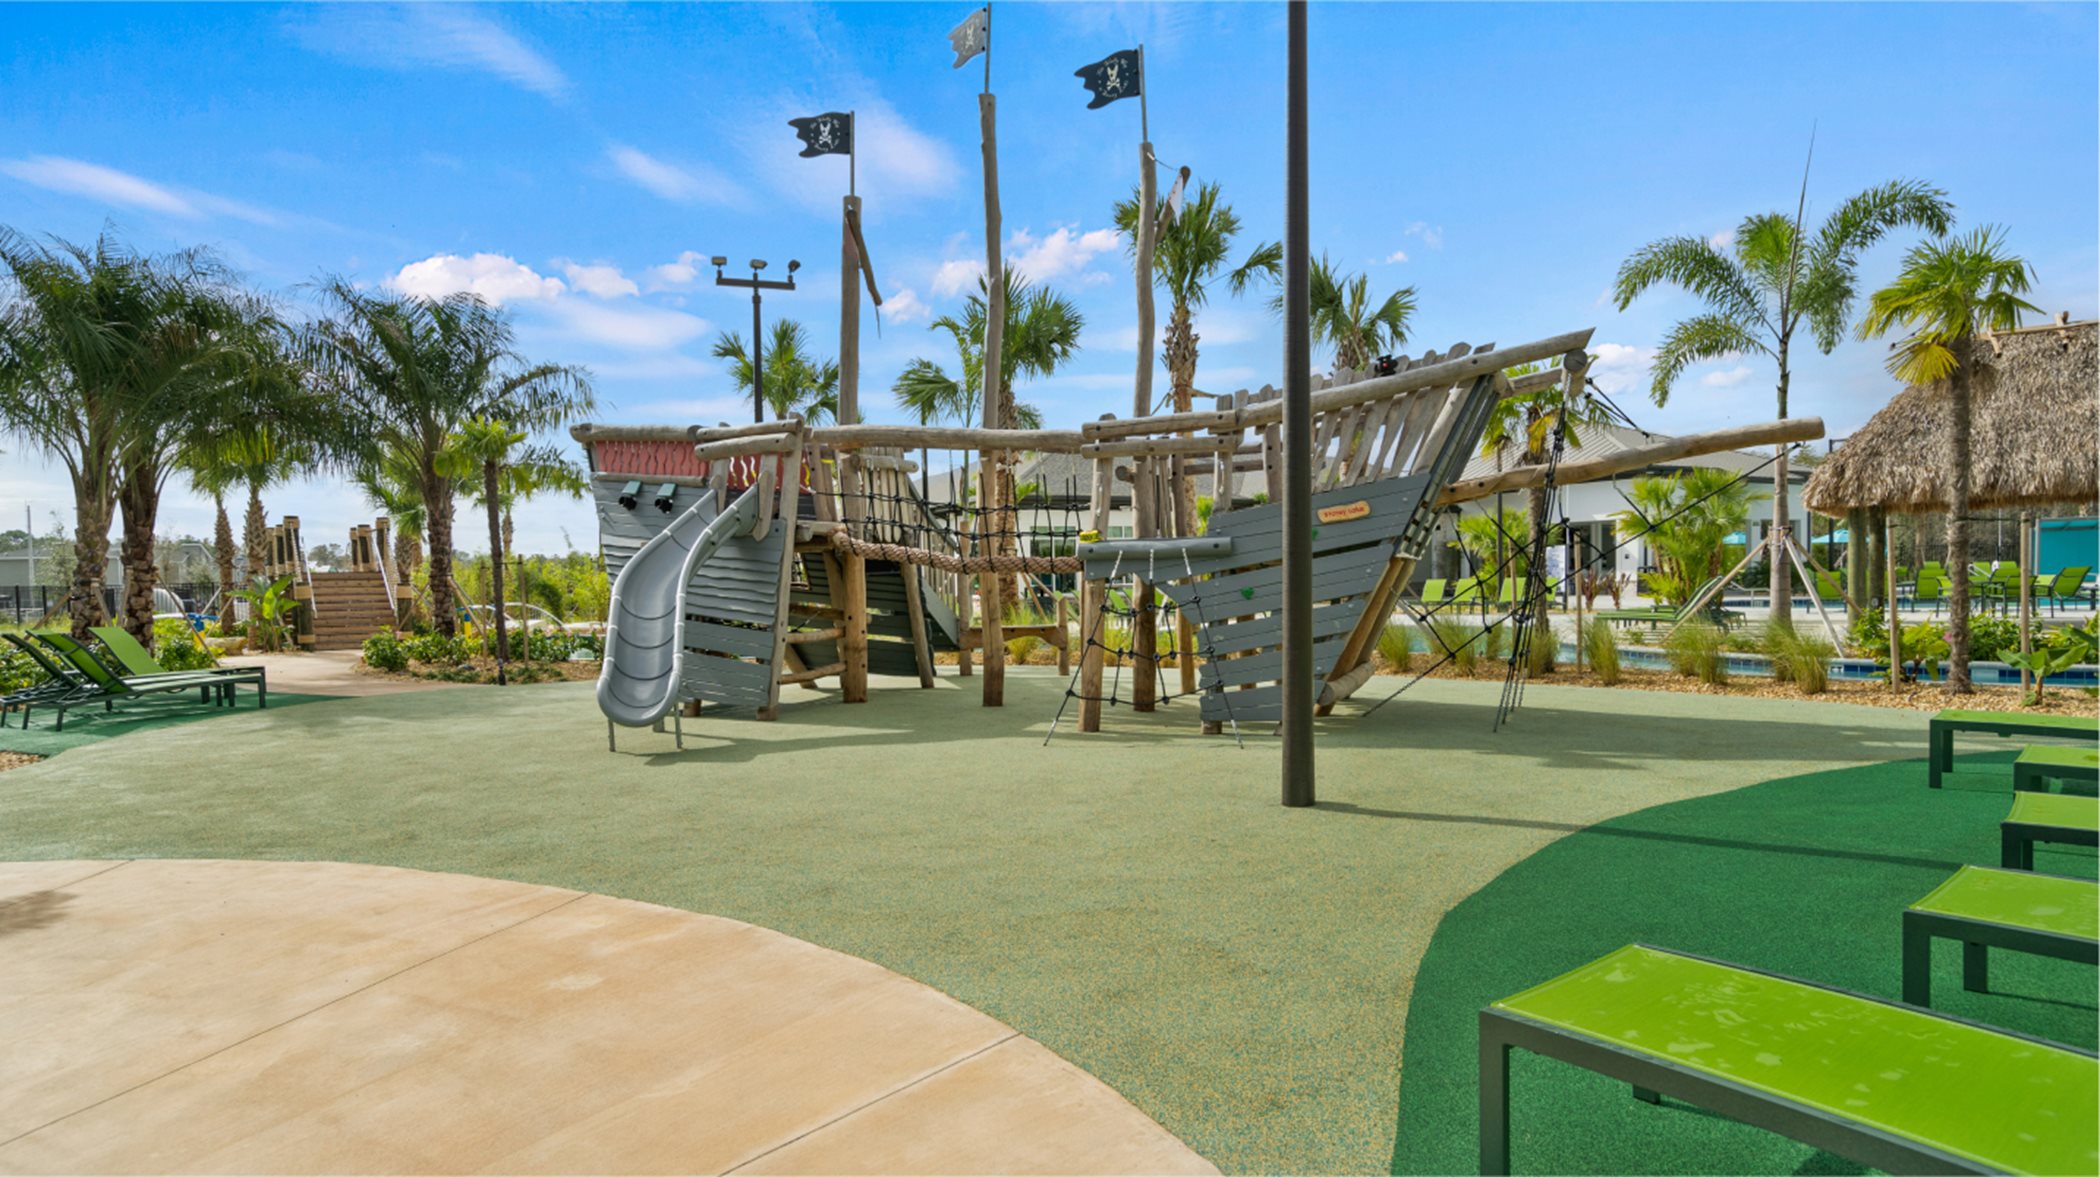 Playground at Bronson Clubhouse